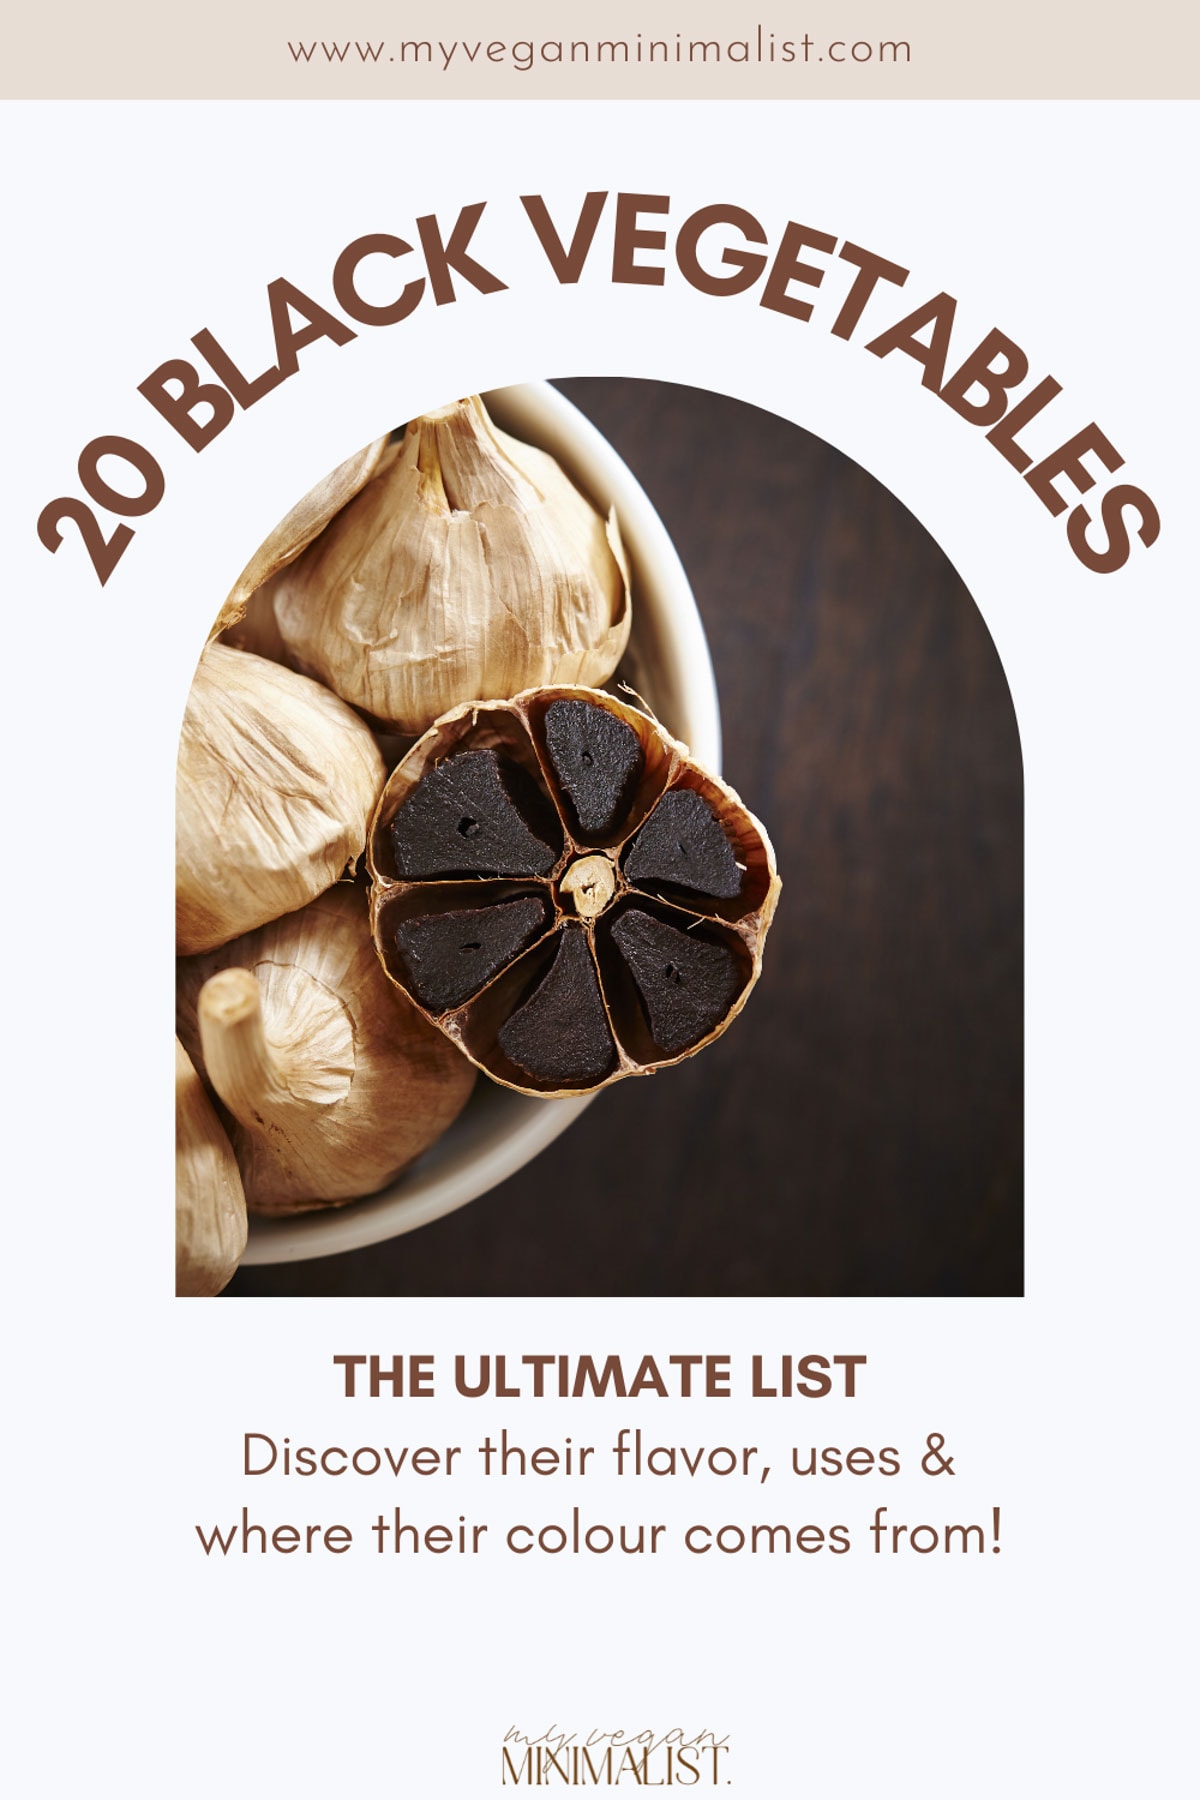 A graphic including a photo of black garlic in the middle and text around it.